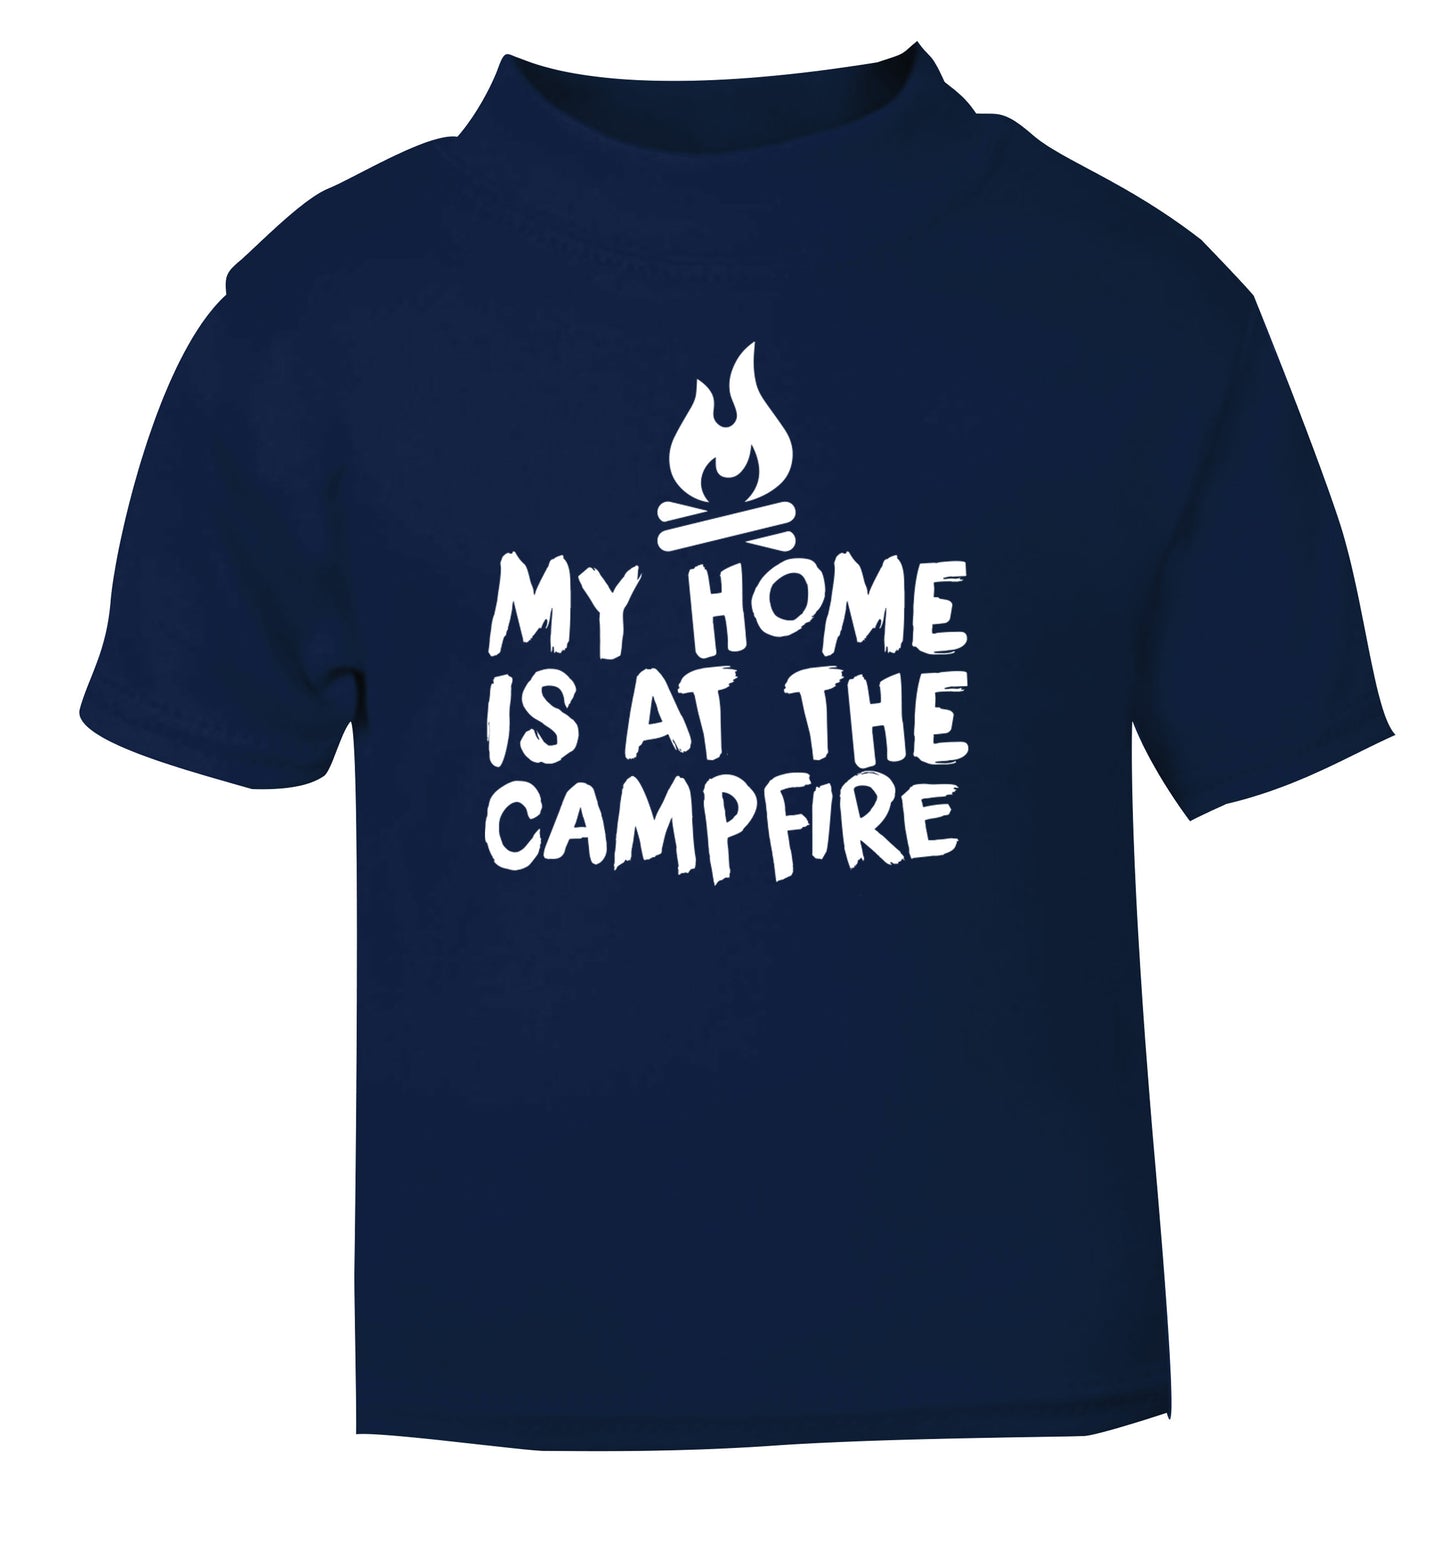 My home is at the campfire navy Baby Toddler Tshirt 2 Years